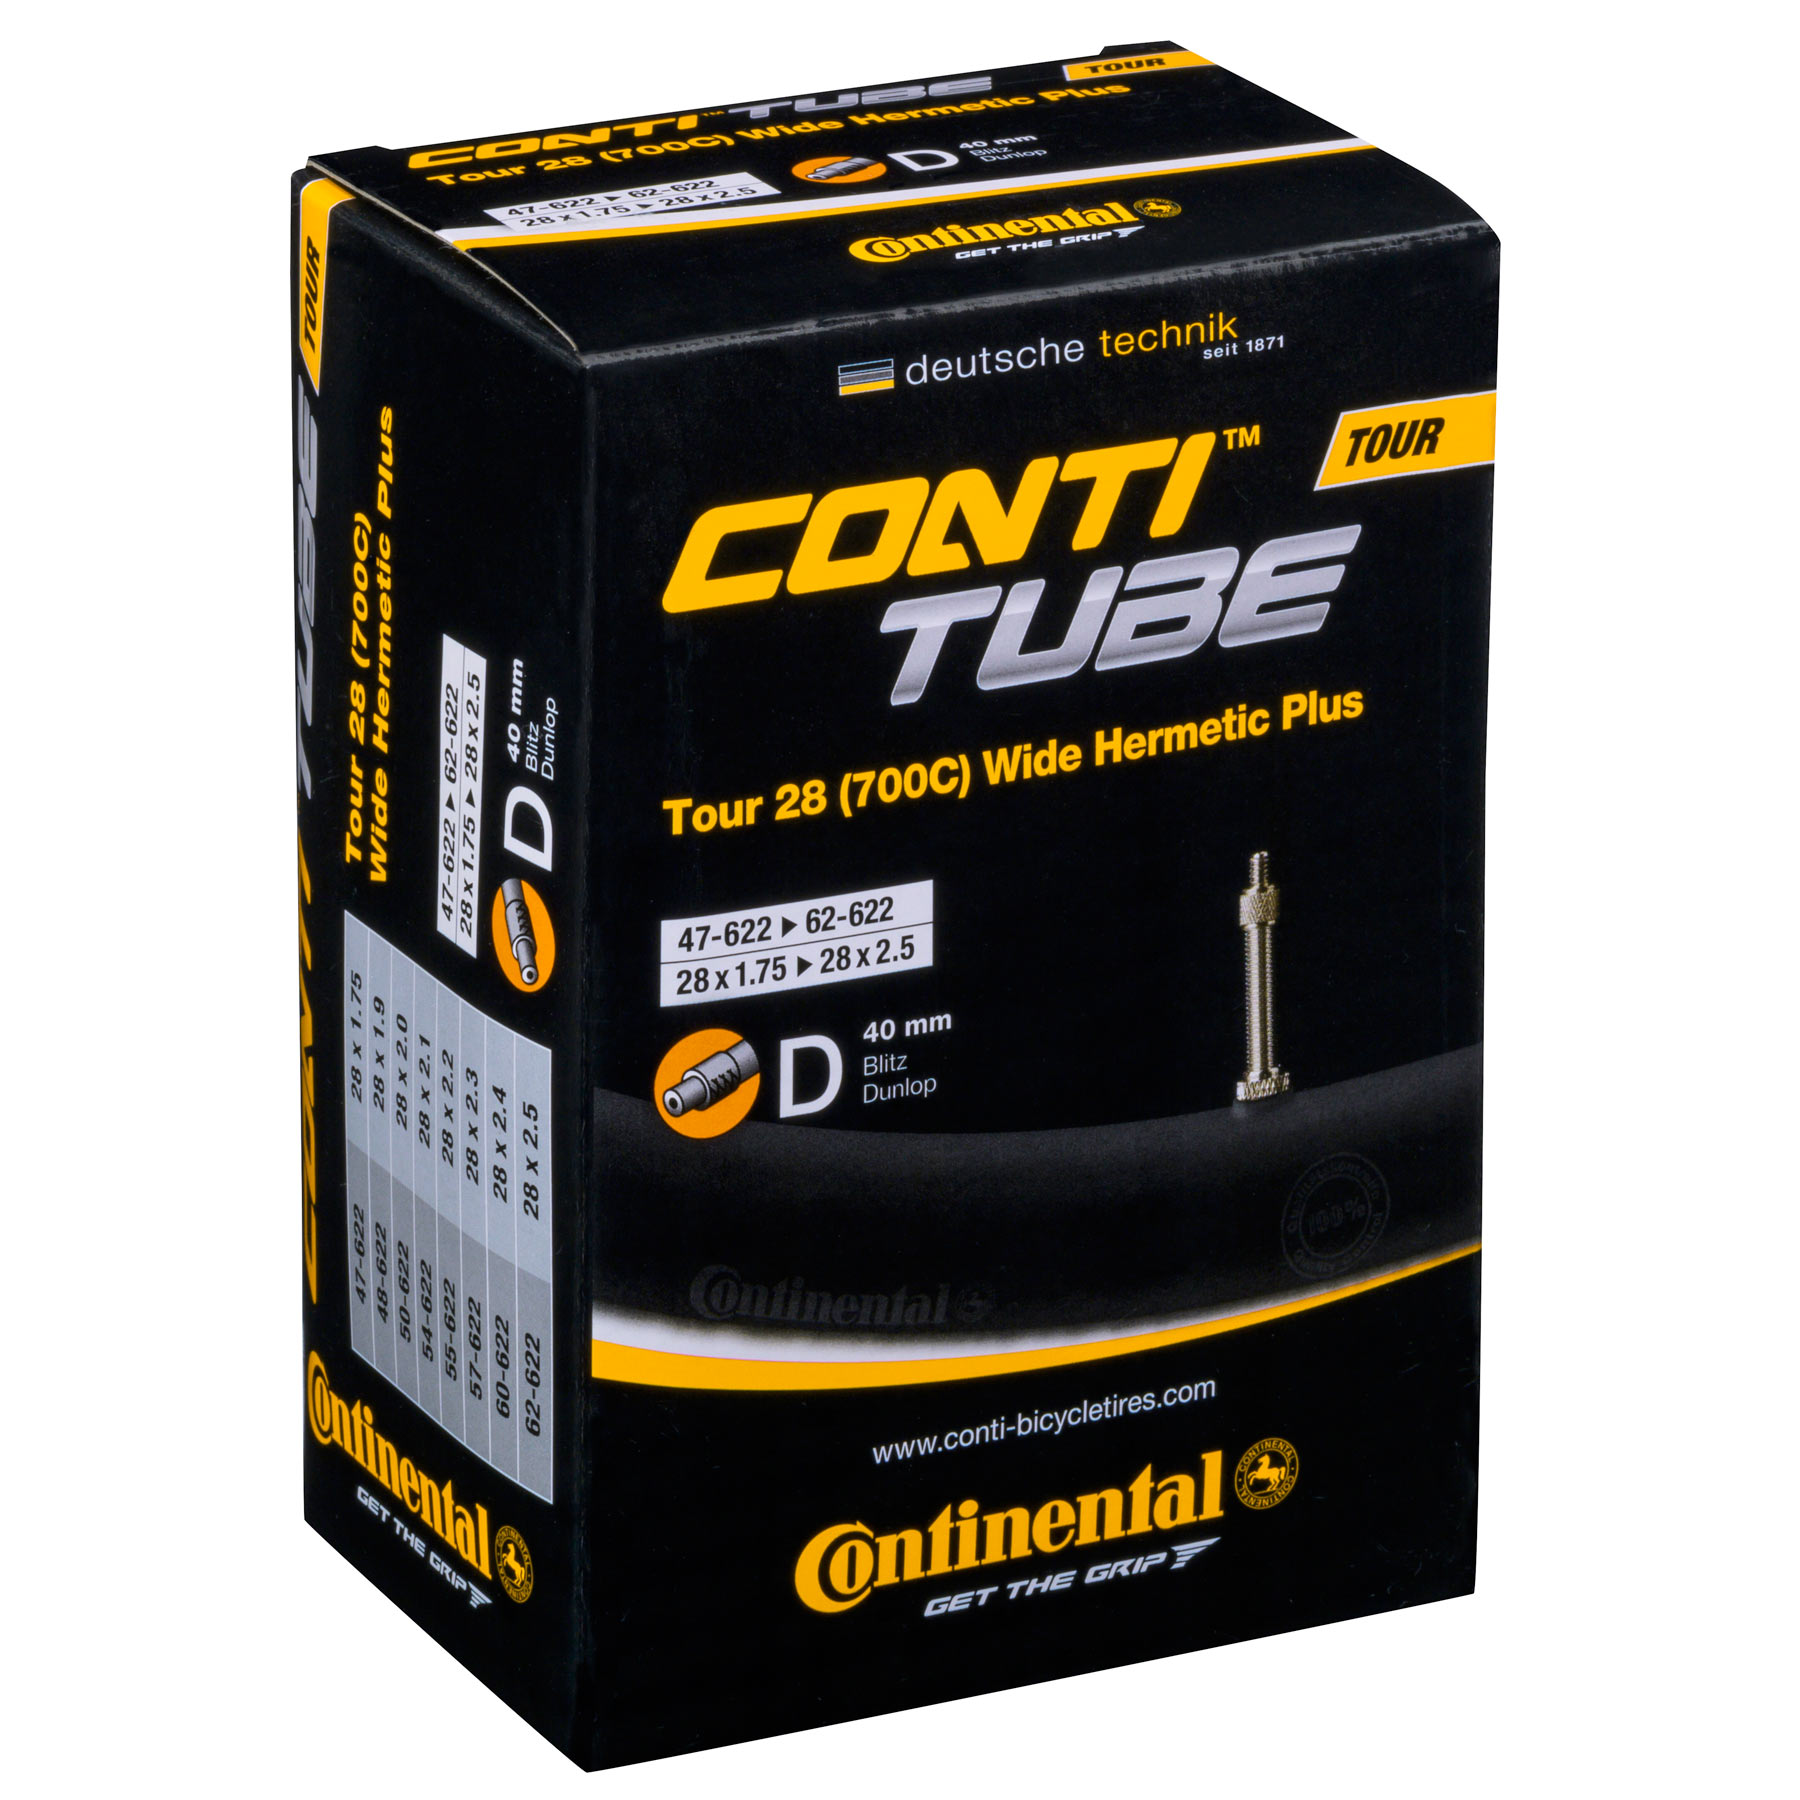 Image of Continental Tour 28 Wide Hermetic Plus D40 Tube